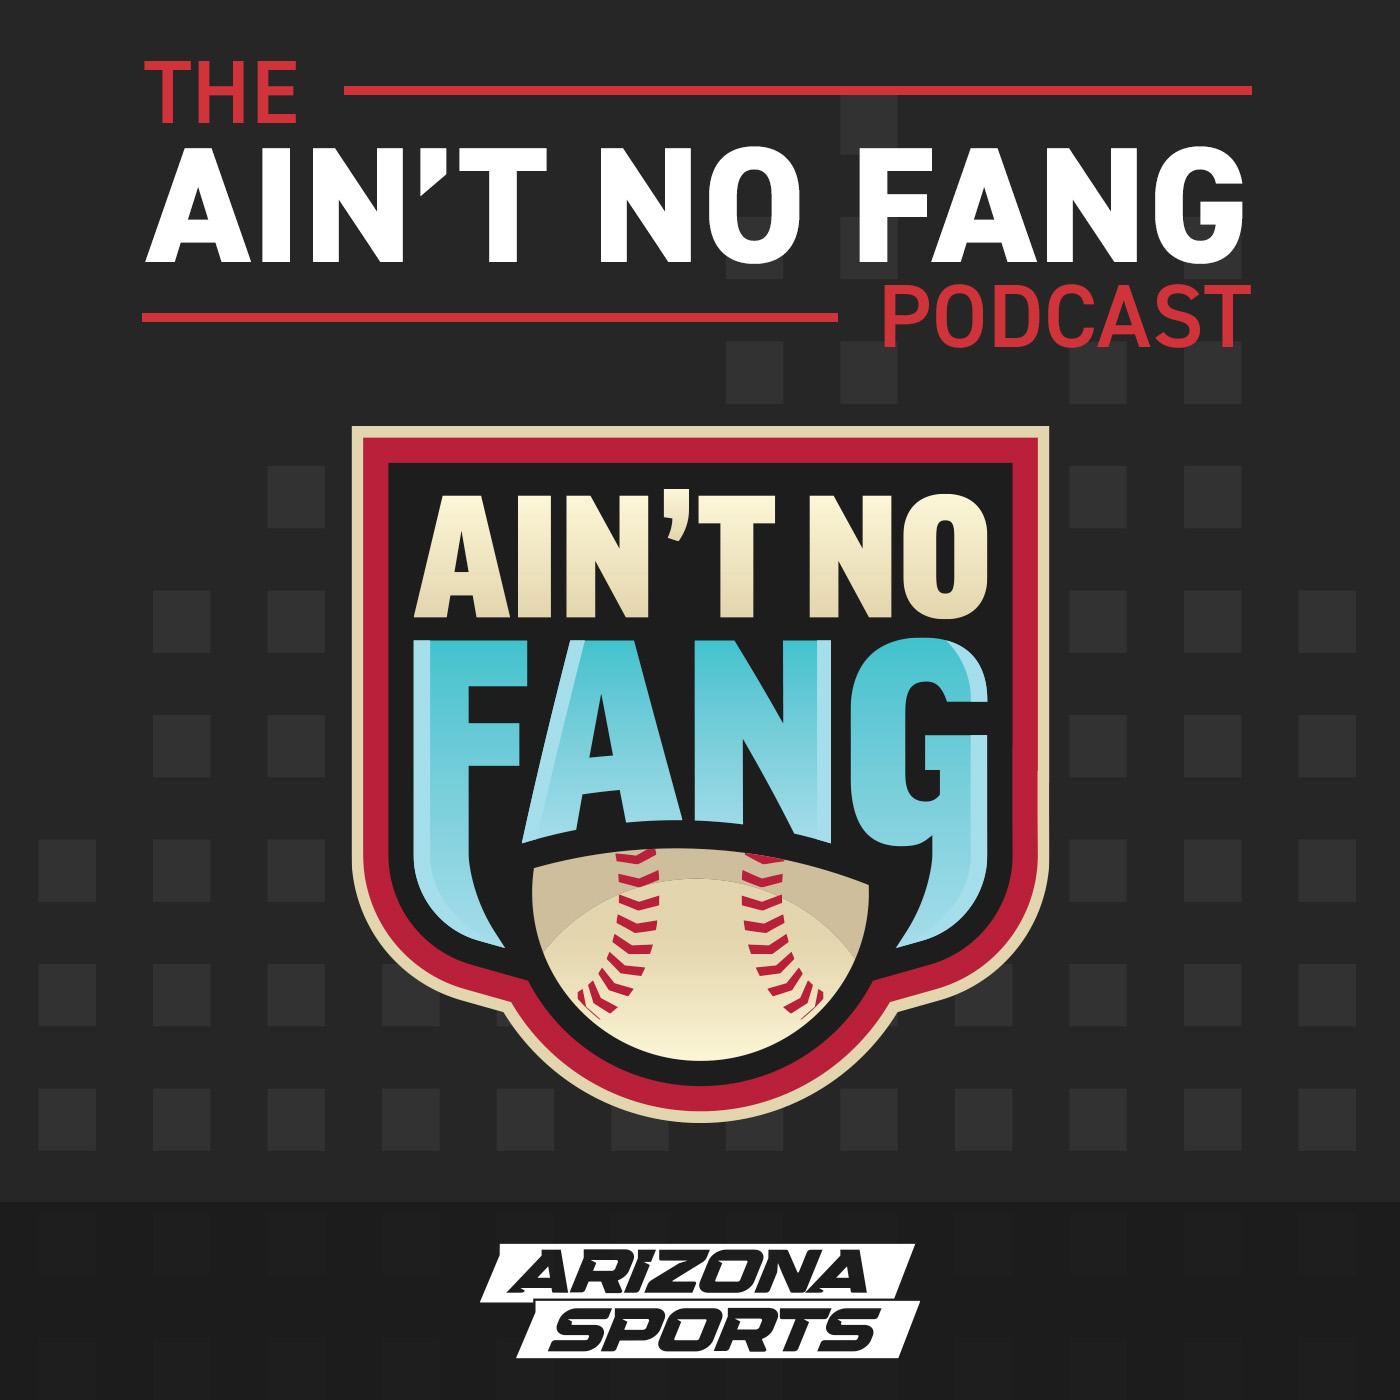 Ain't No Fang - Winners of 9 of the last 11